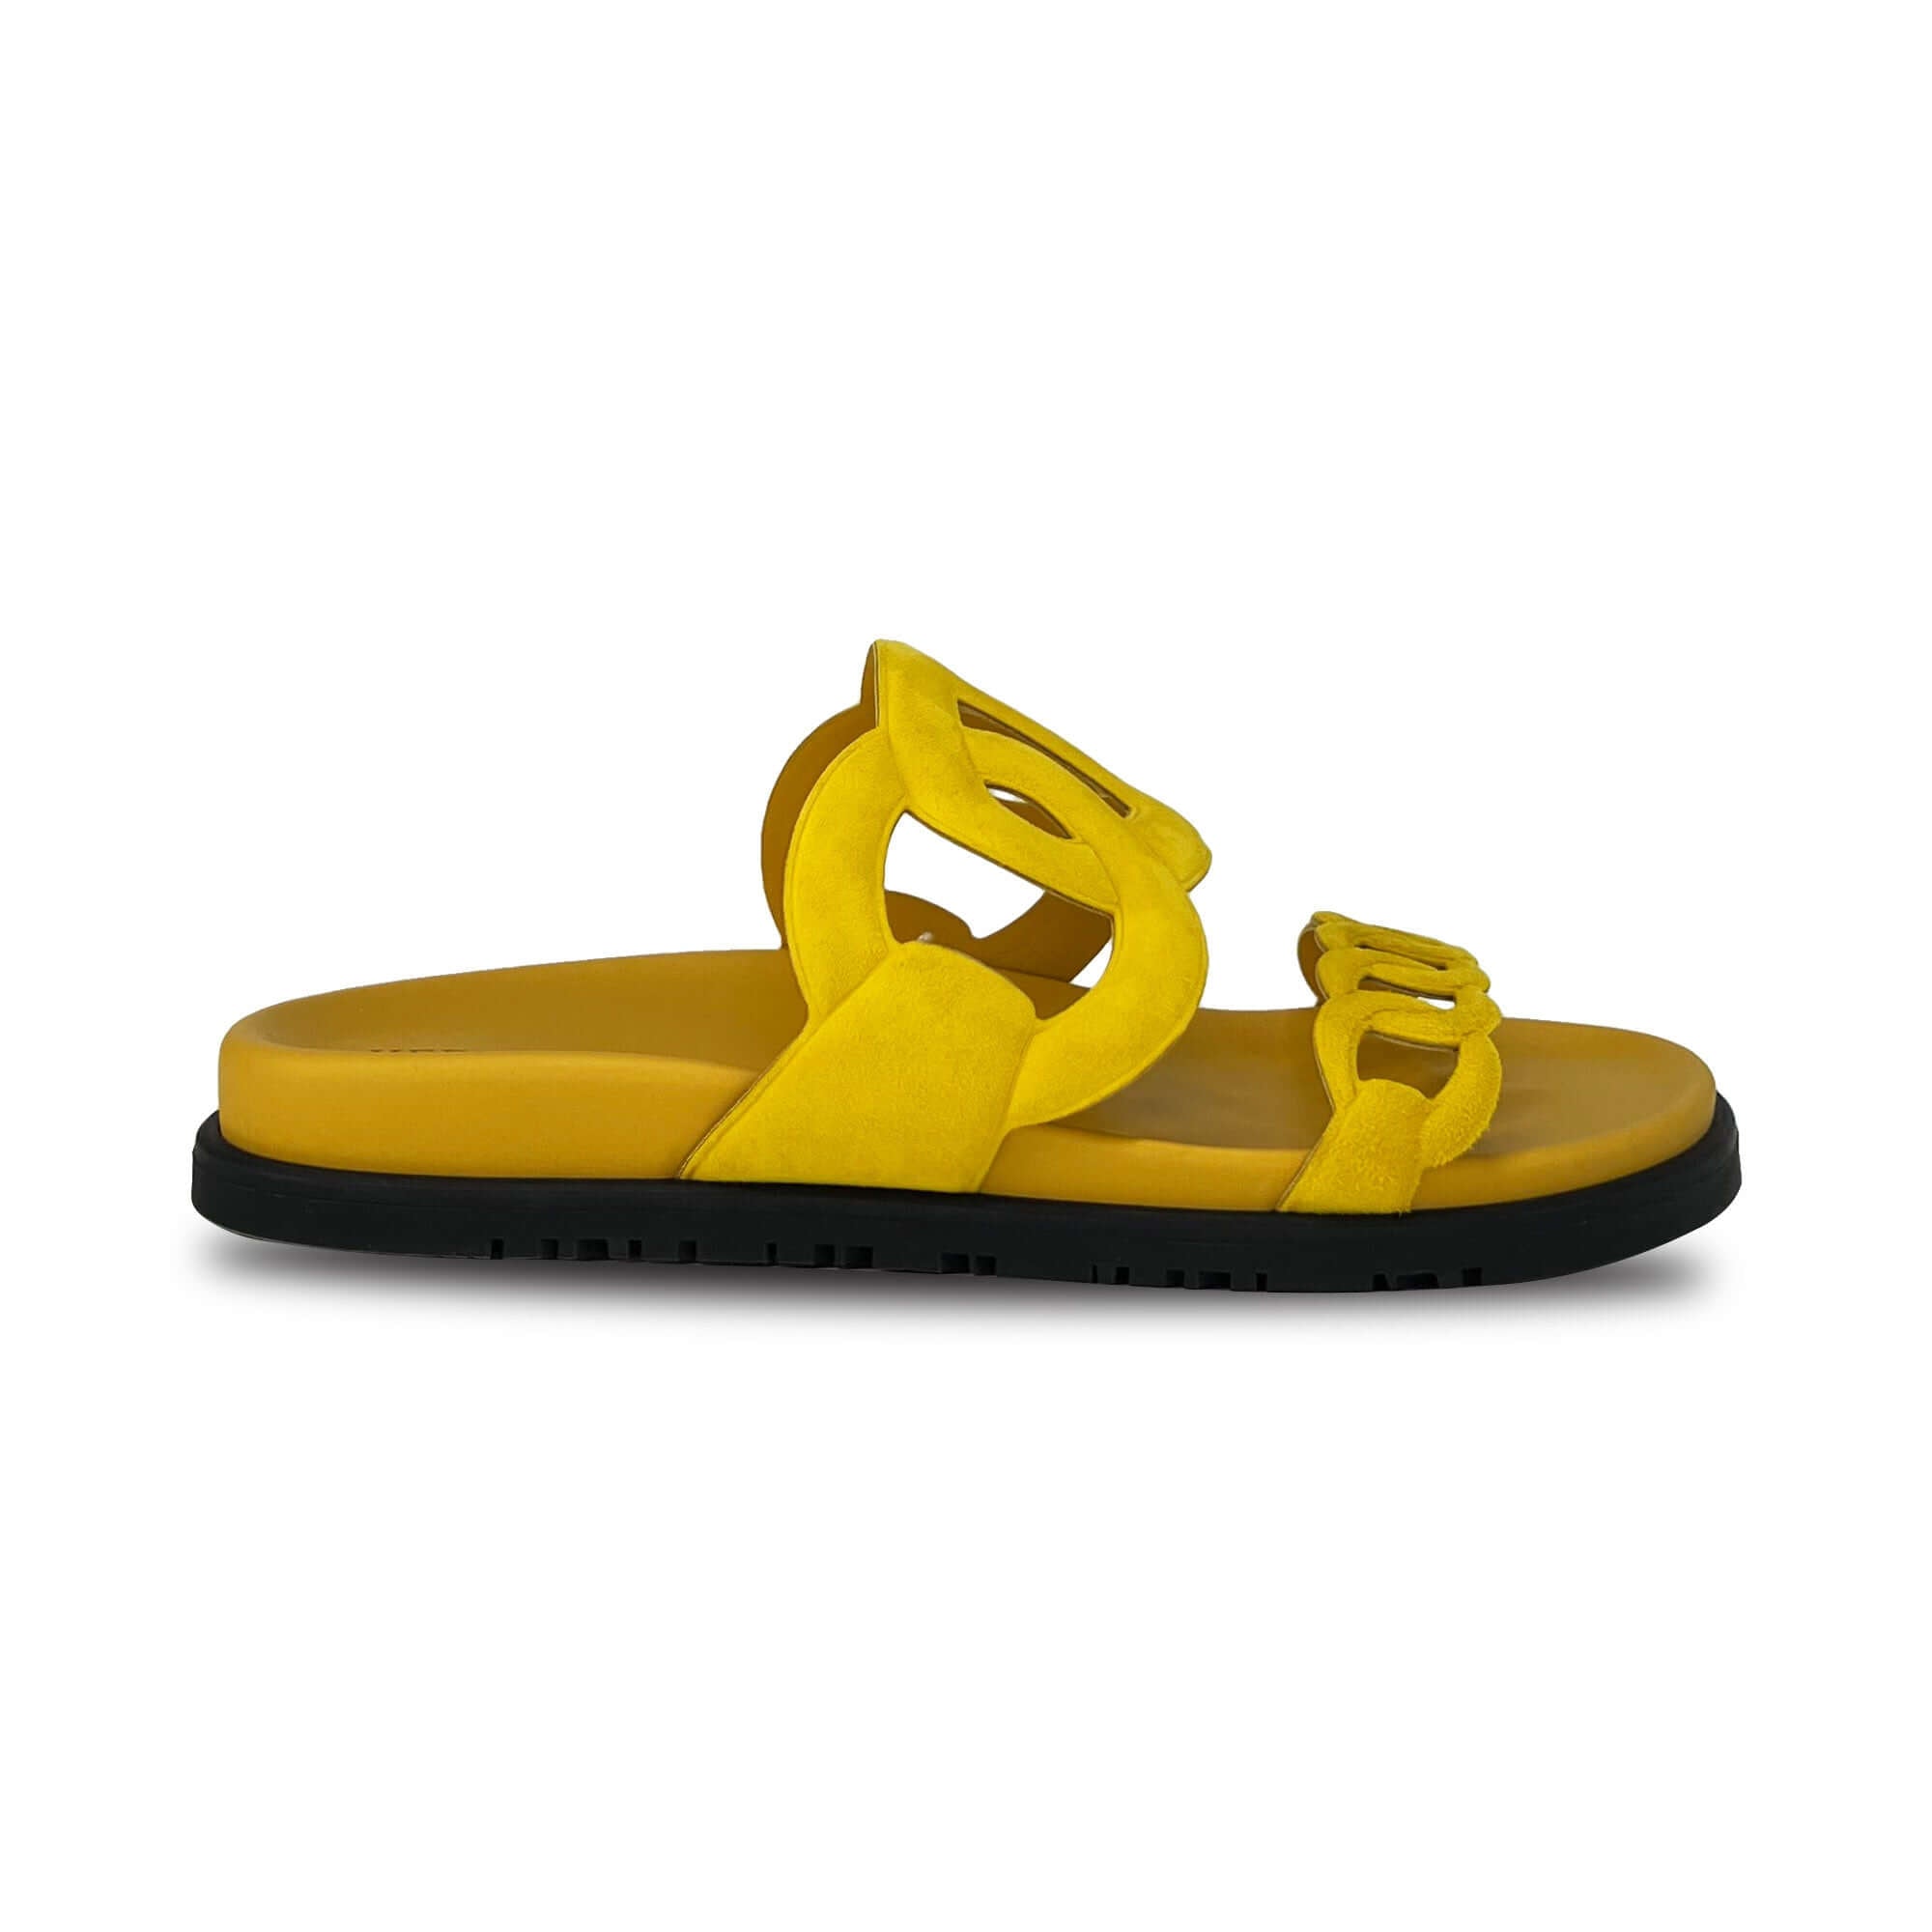 Hermes Extra Designer Sandals in yellow side